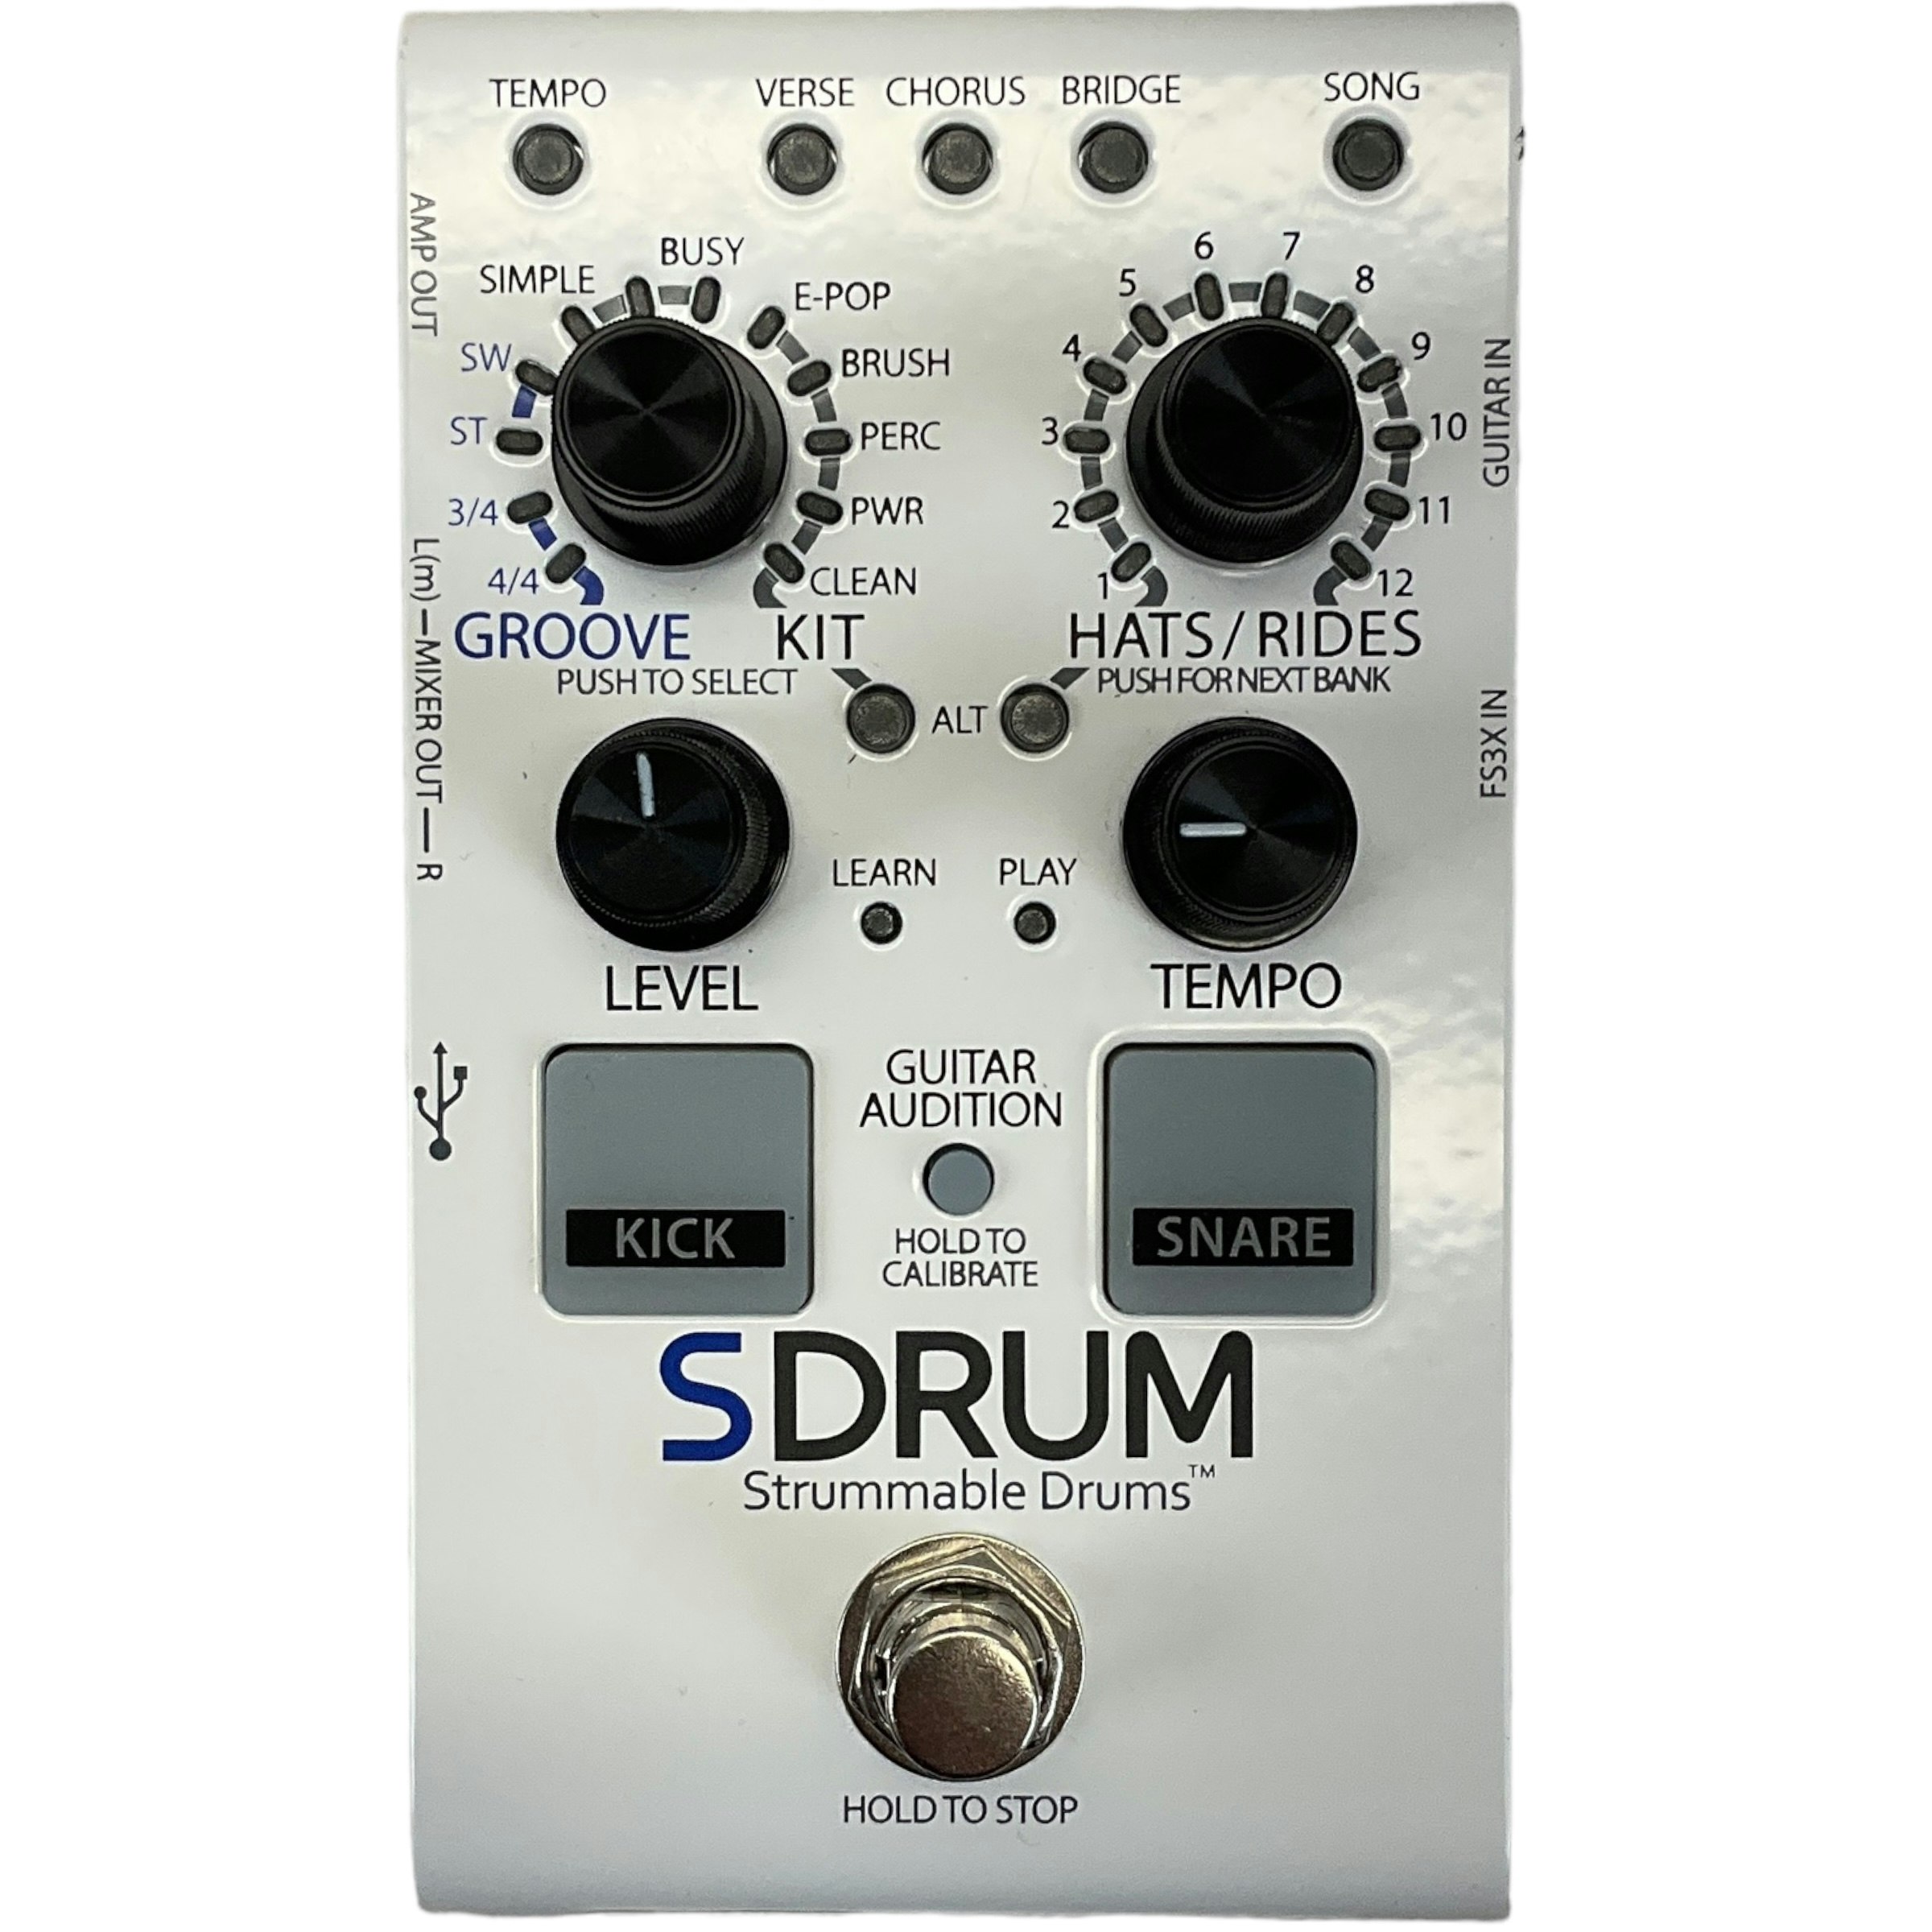 Used Digitech Sdrum Strummable Drums Guitar Effect